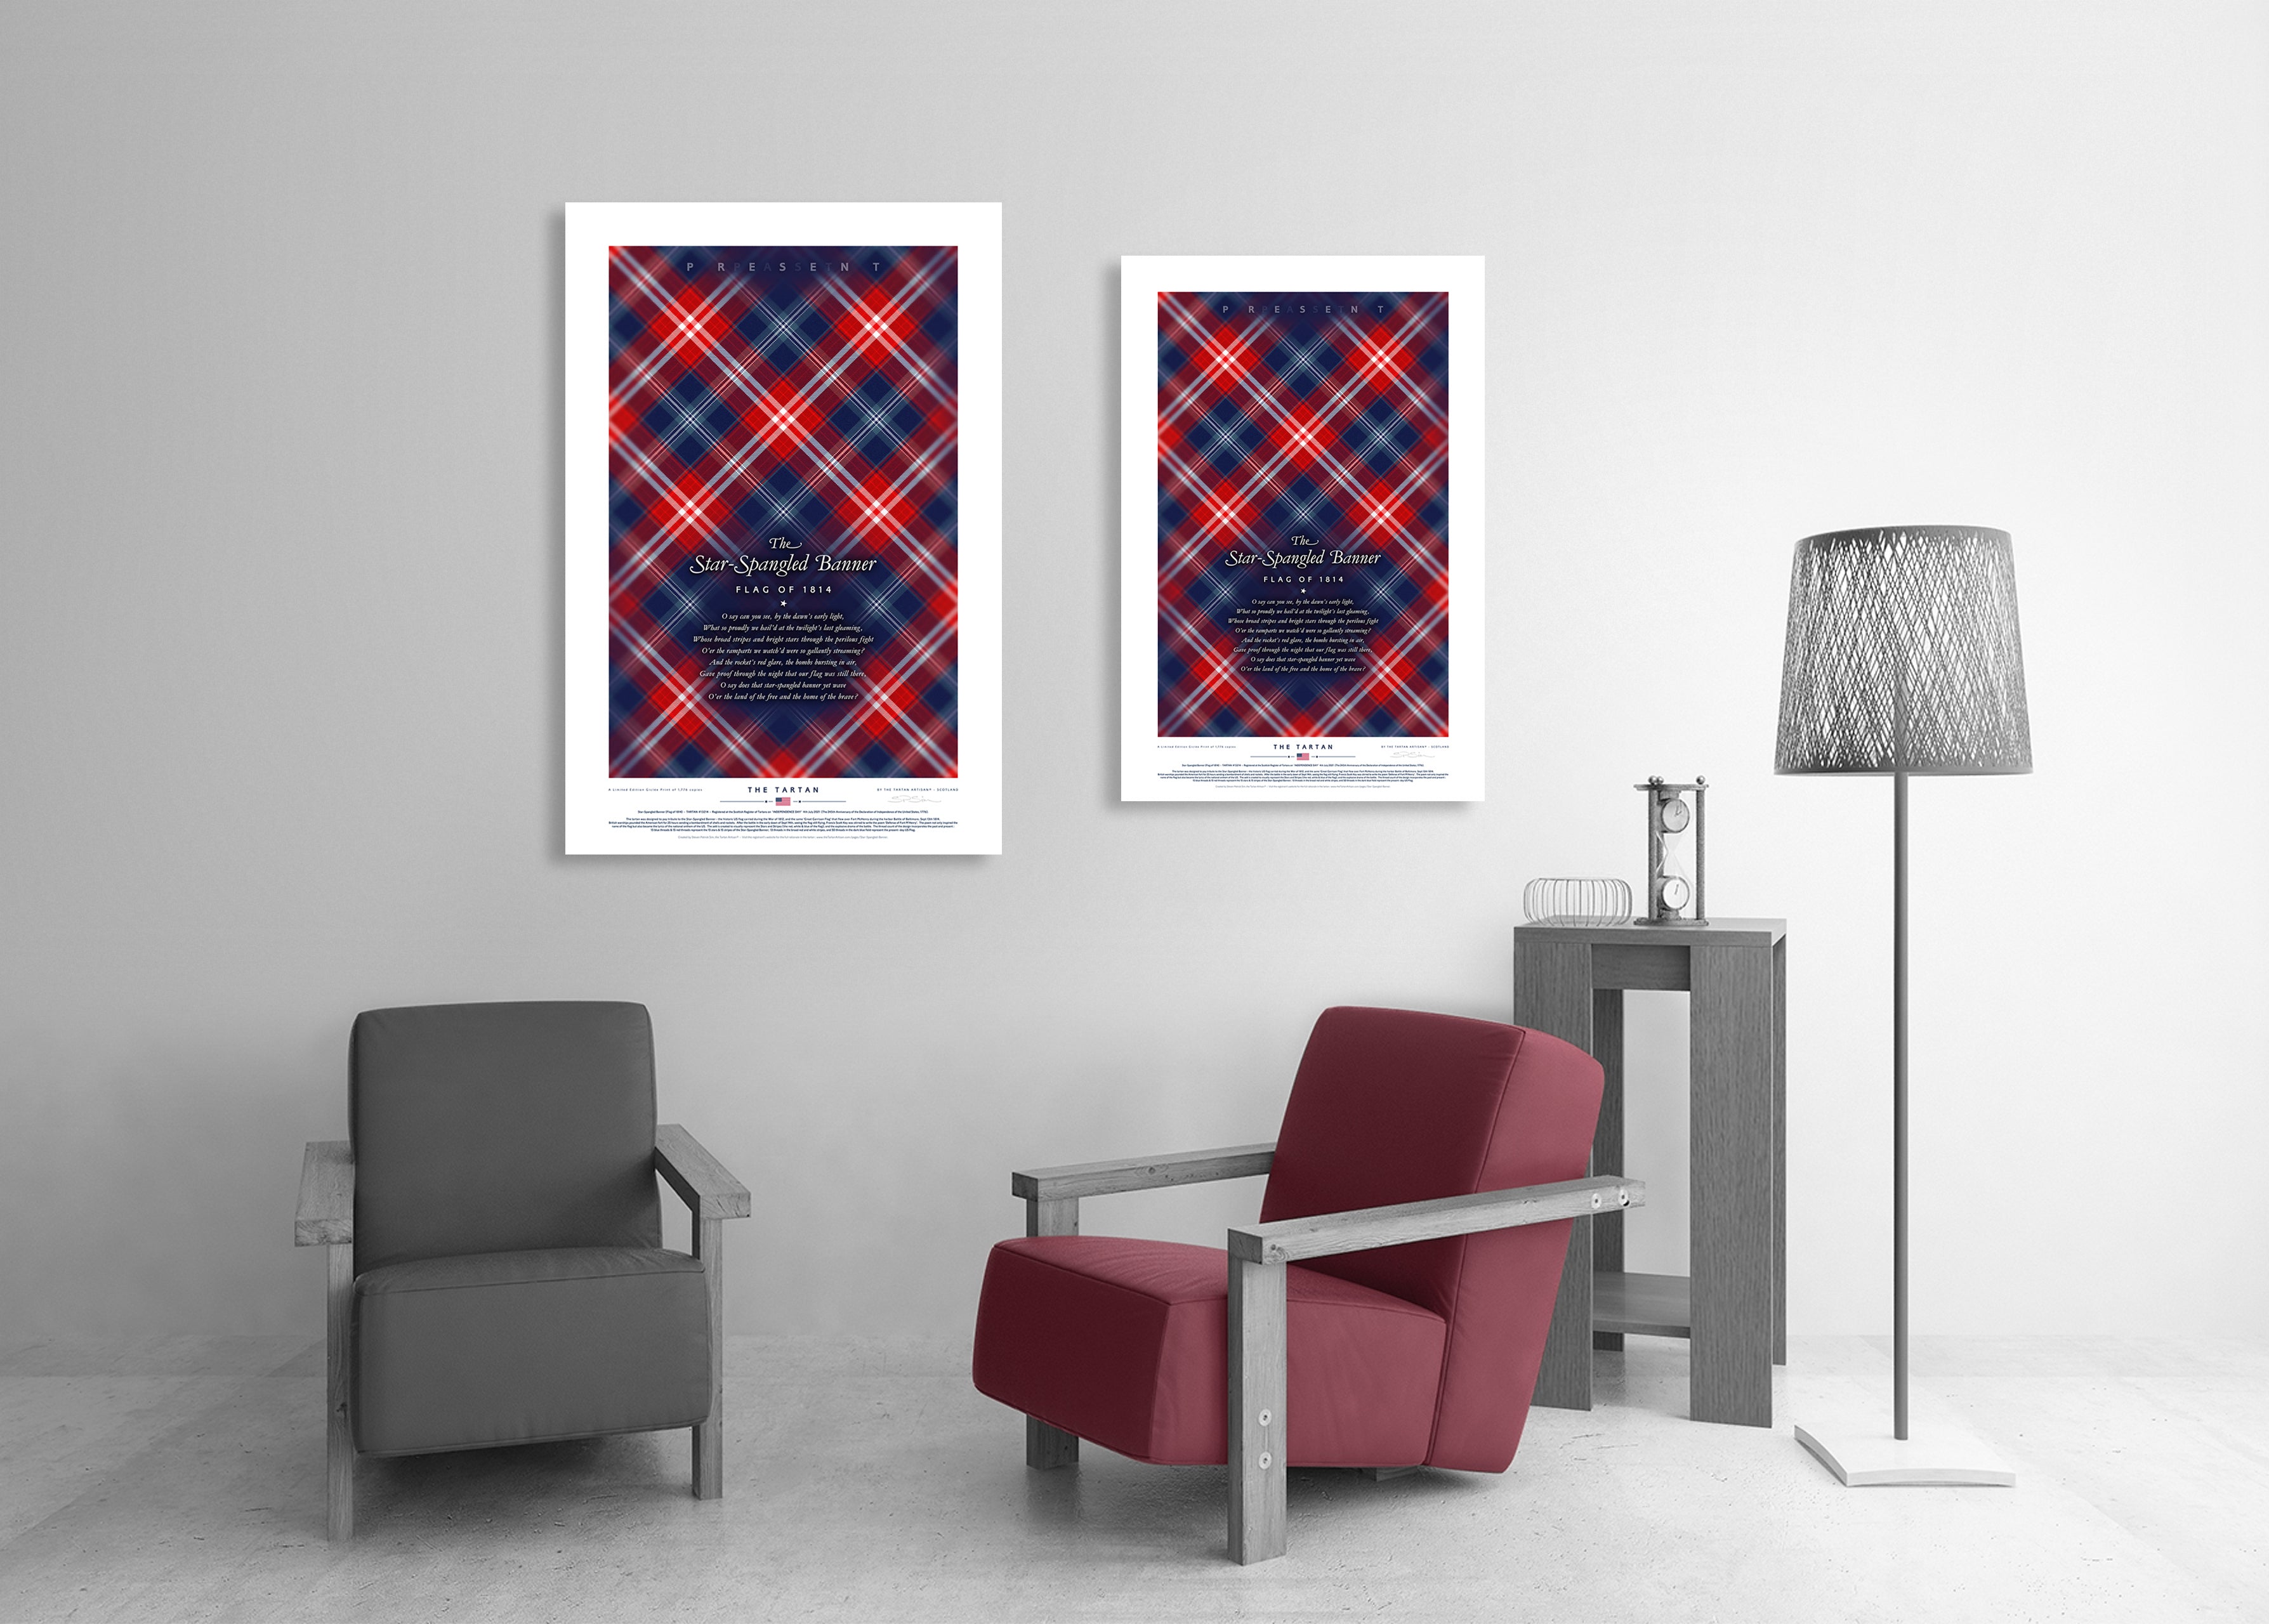 Star-Spangled Banner Tartan two sizes compared fine art published print - PRESENT